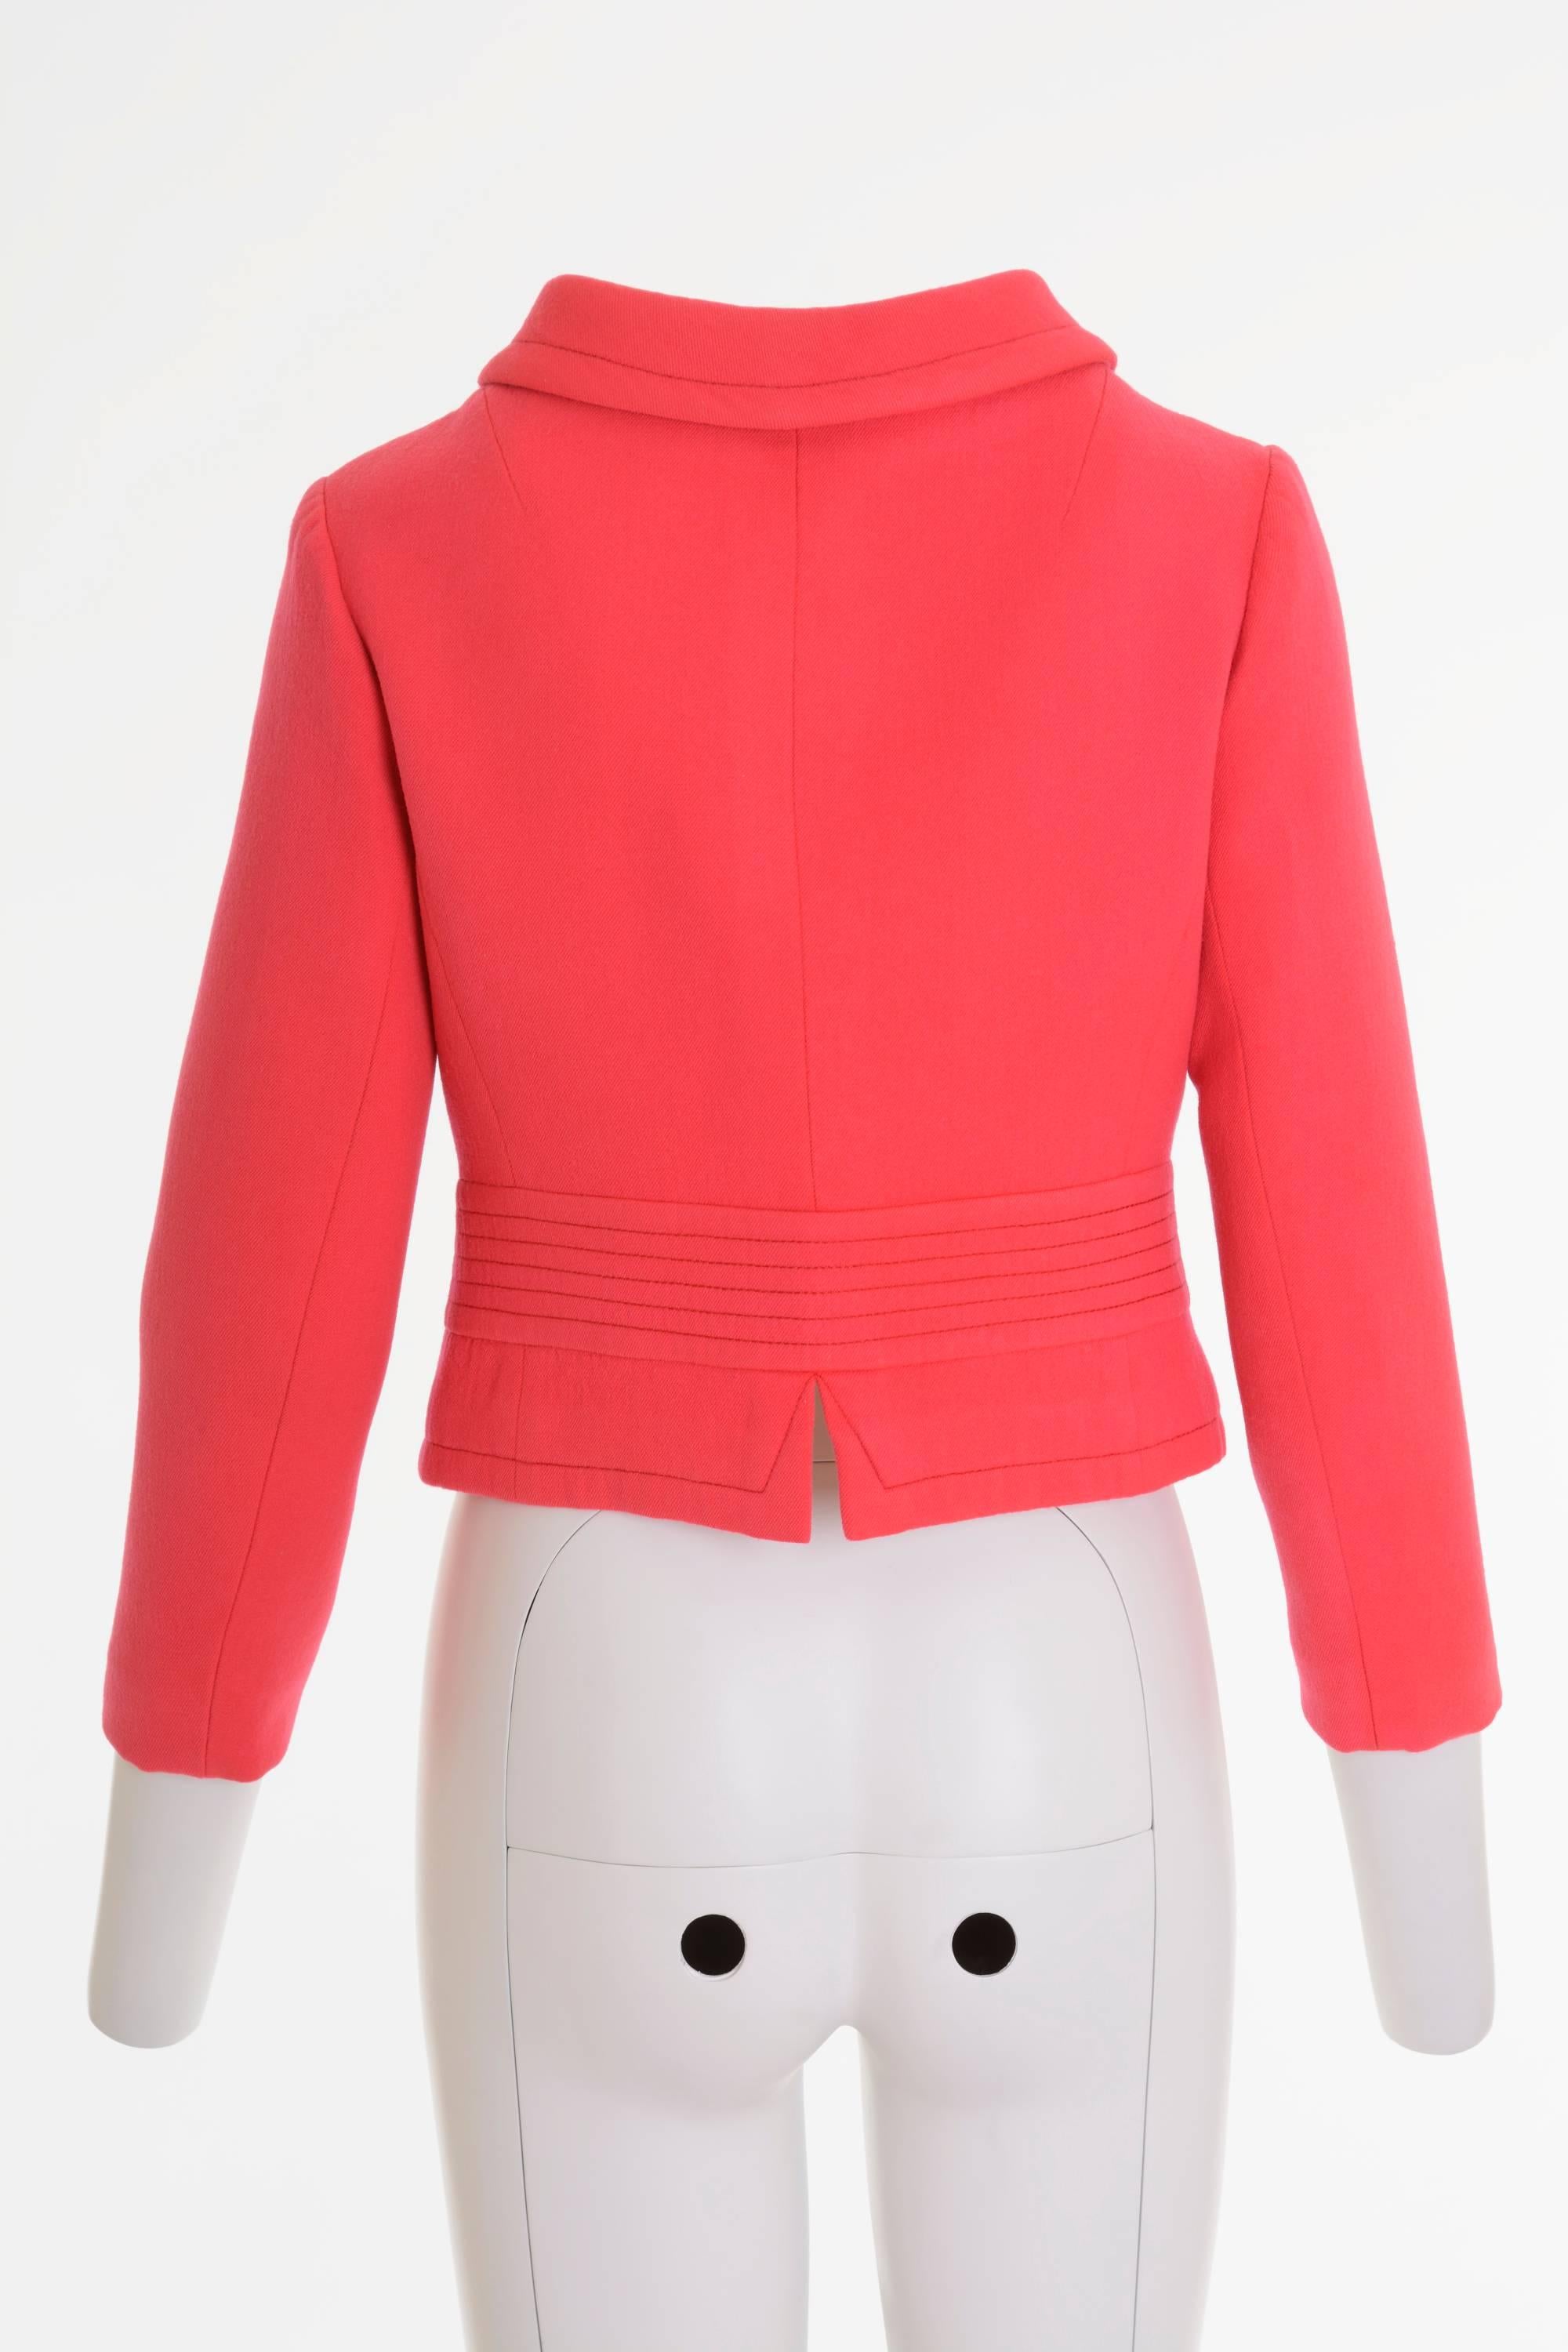 1960s Jean Patou jacket in a coral wool fabric, buttons closure, waist belt closure, top stitches, fully satin lined, back kick pleat, tailored in London.

Good Vintage Condition ( small pulled wires on the left sleeve) 

Label: Jean Patou